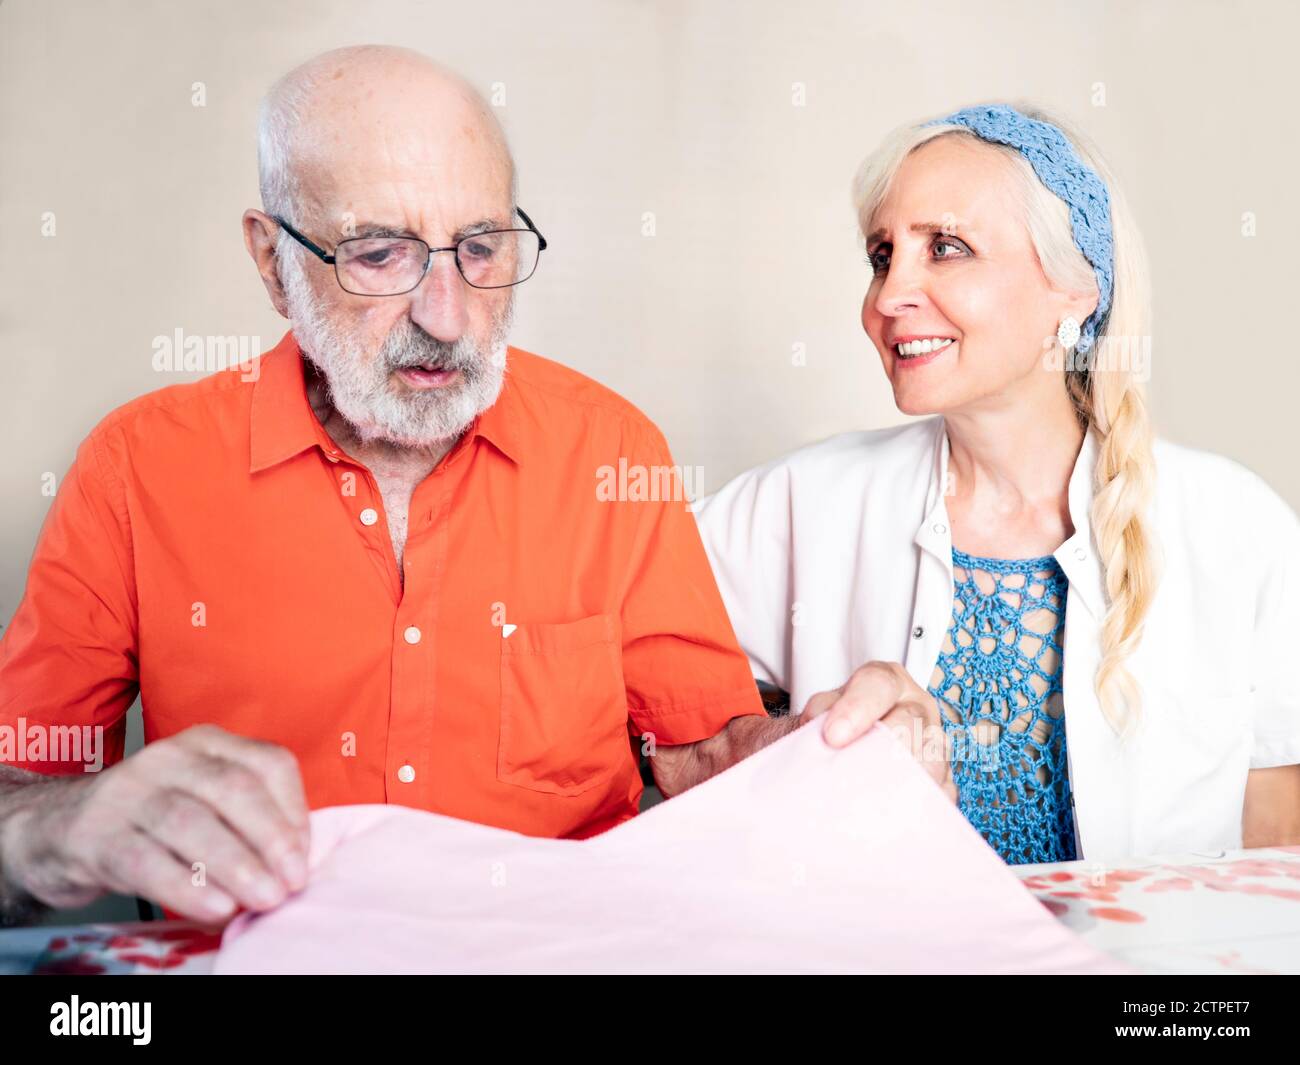 Horizontal portrait of a female medical assistant taking care of an ederly man Stock Photo